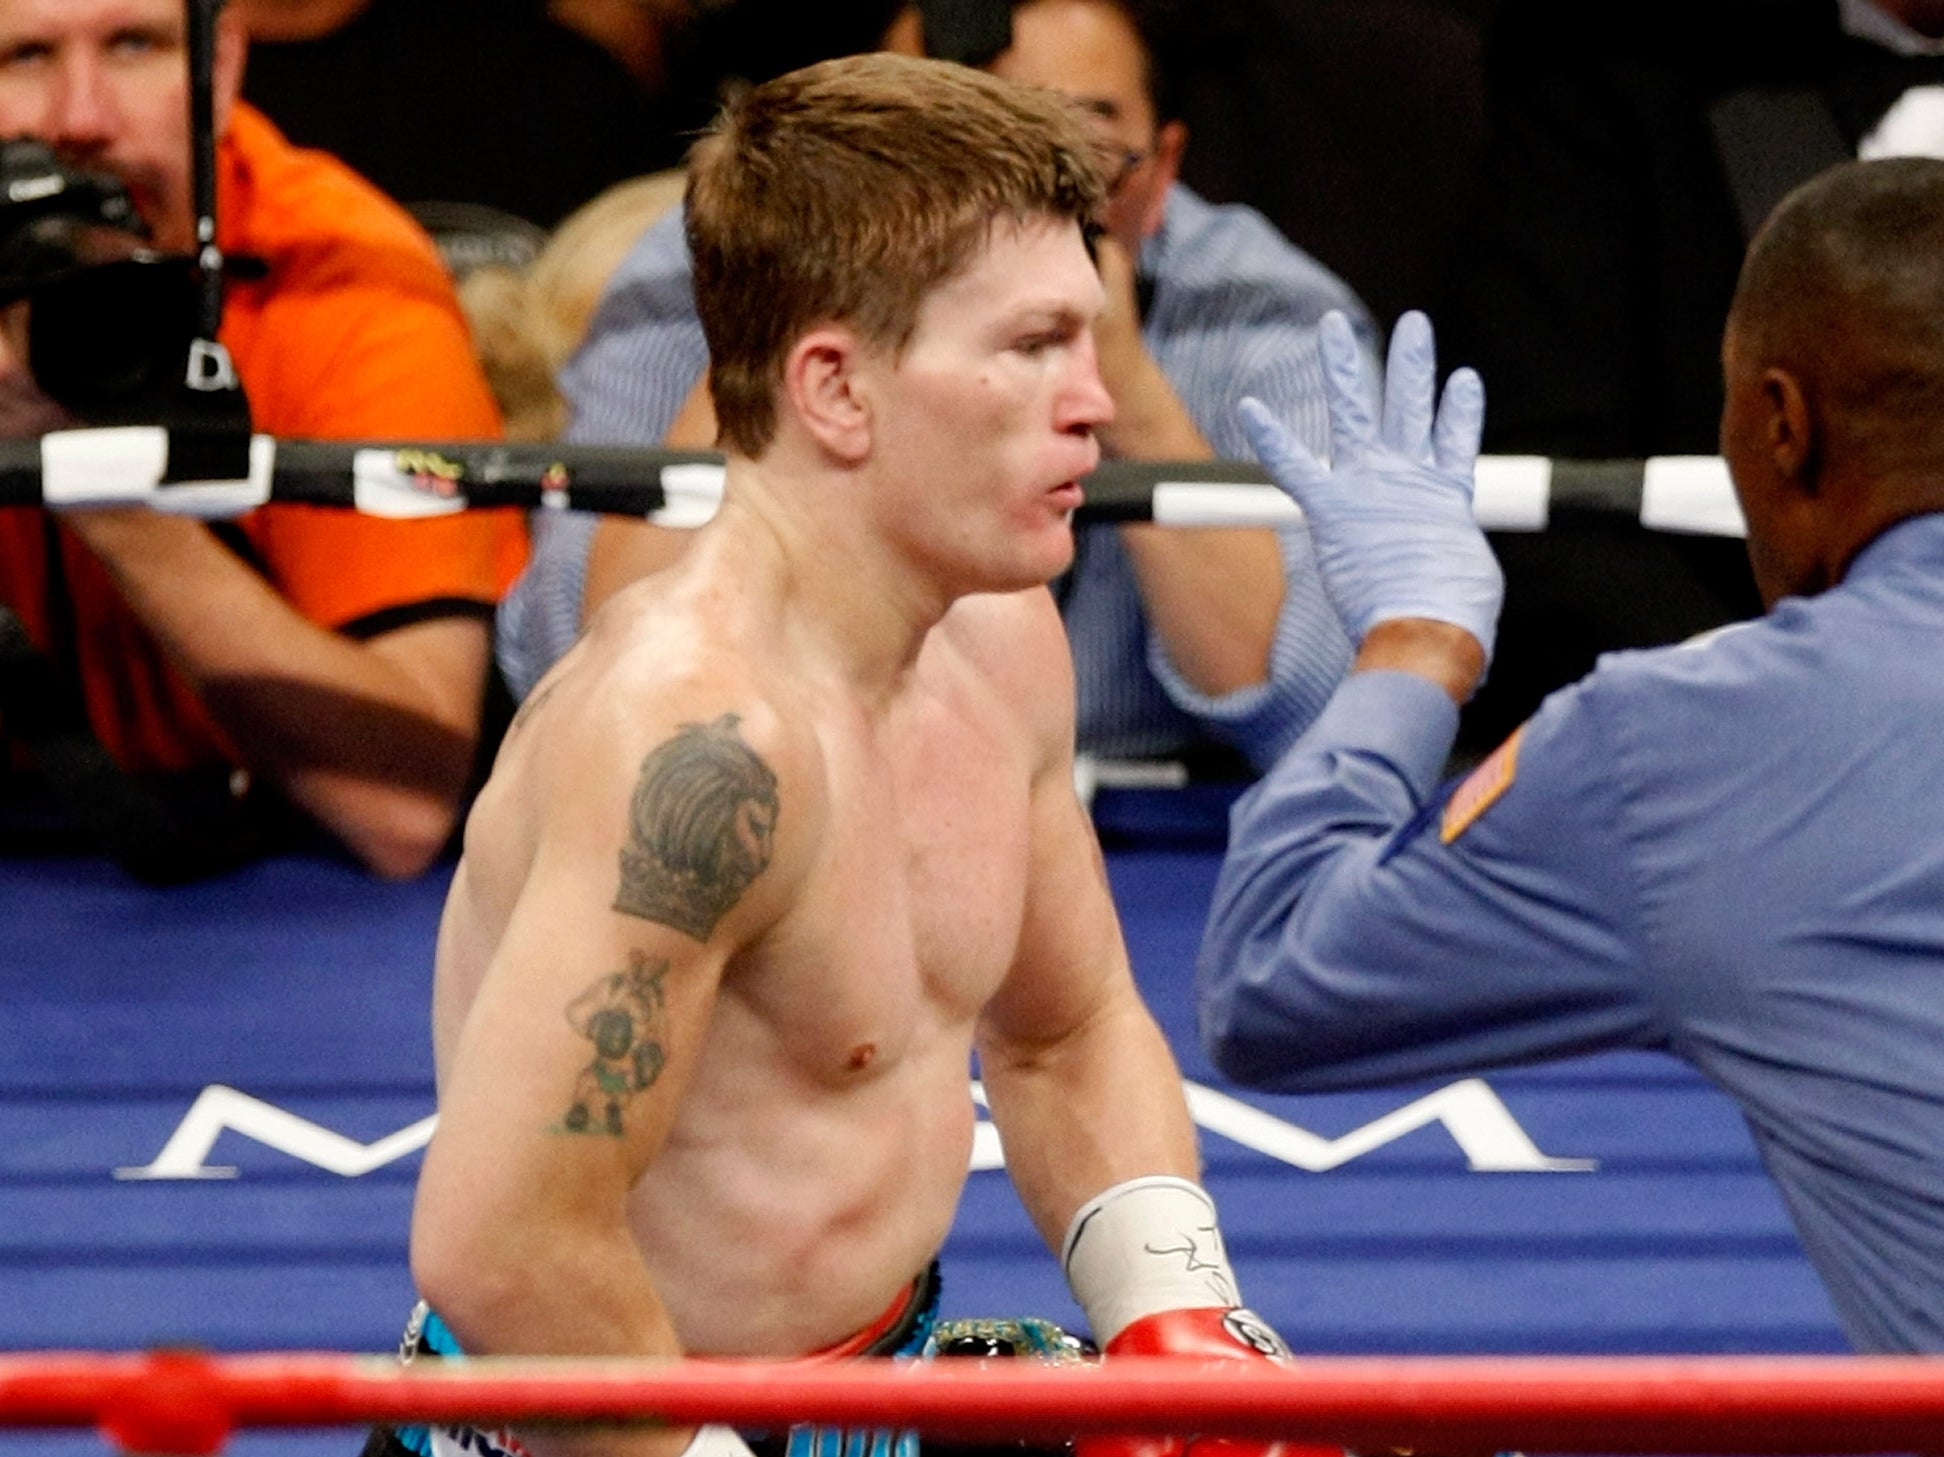 Ricky Hatton during his knockout defeat by Manny Pacquiao in 2009